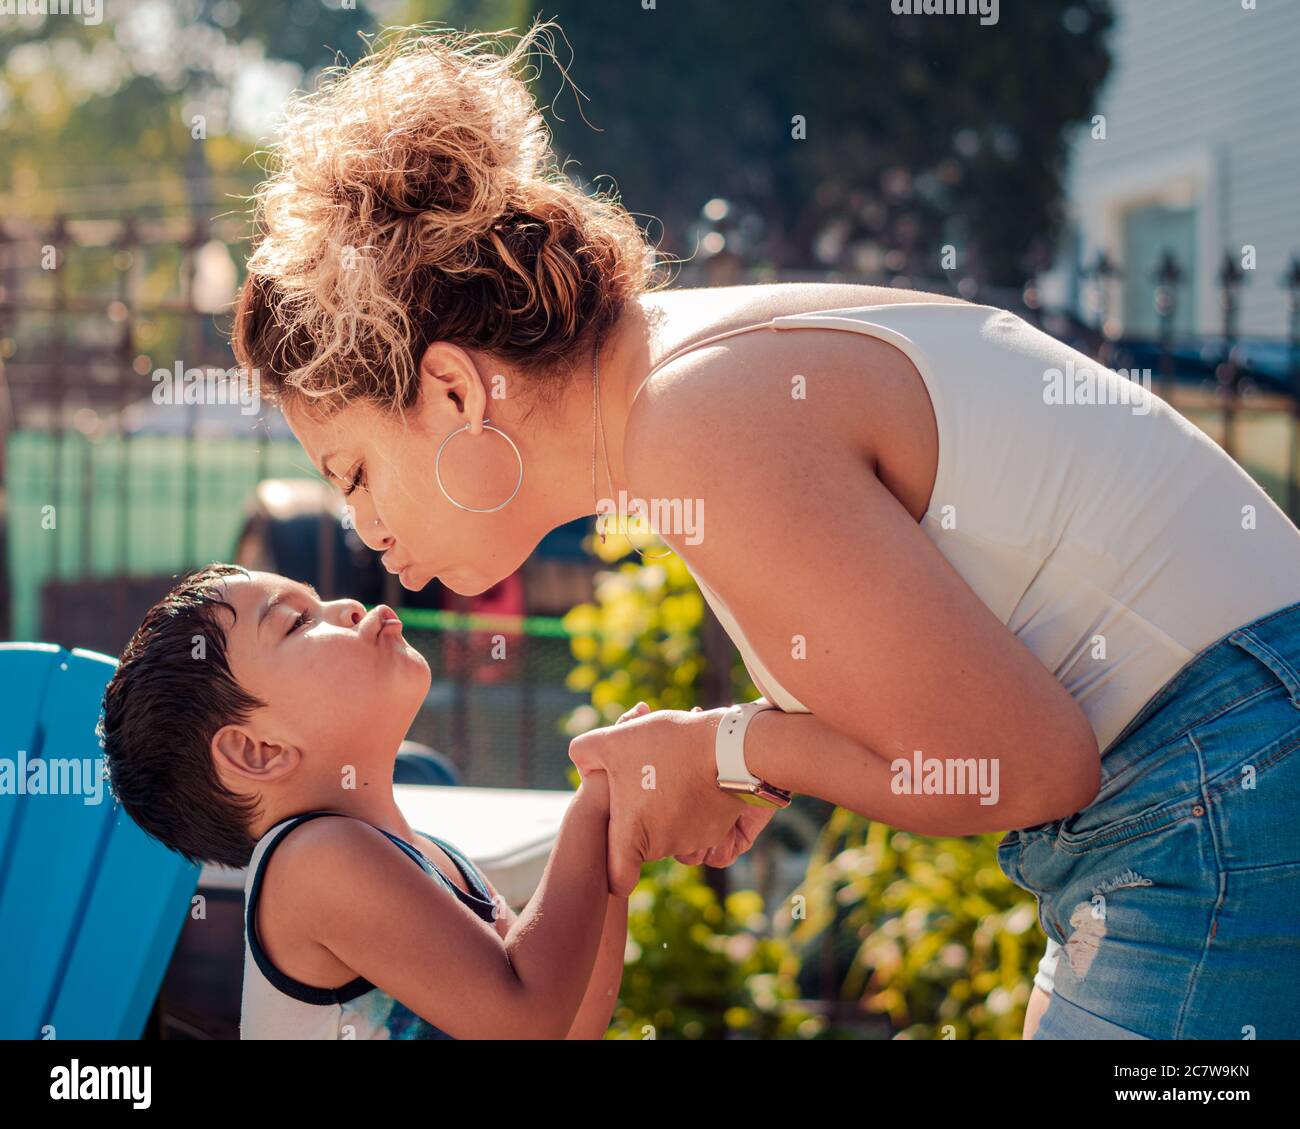 A mother is leaning to kiss her son on the lips at a backyard pool party Stock Photo